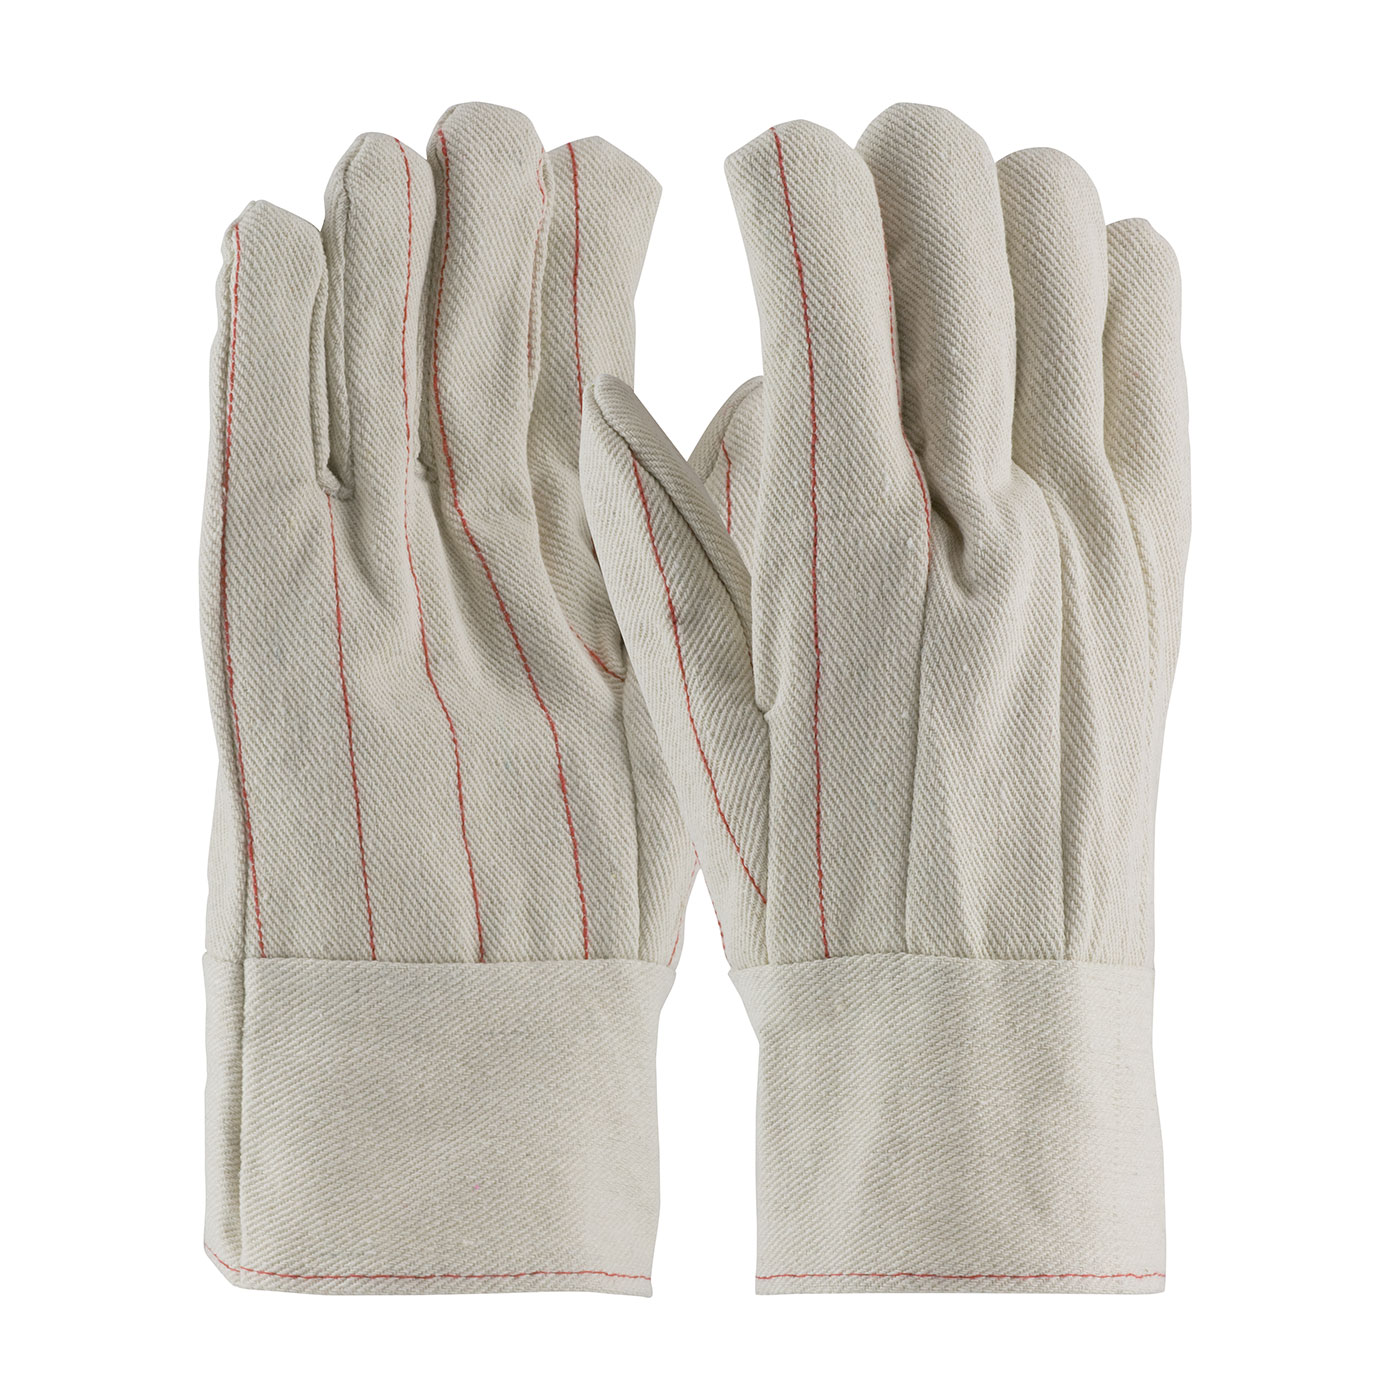 PIP Men's Natural 18oz. Nap-in Finish Double Palm Cotton Canvas Gloves - Band Top